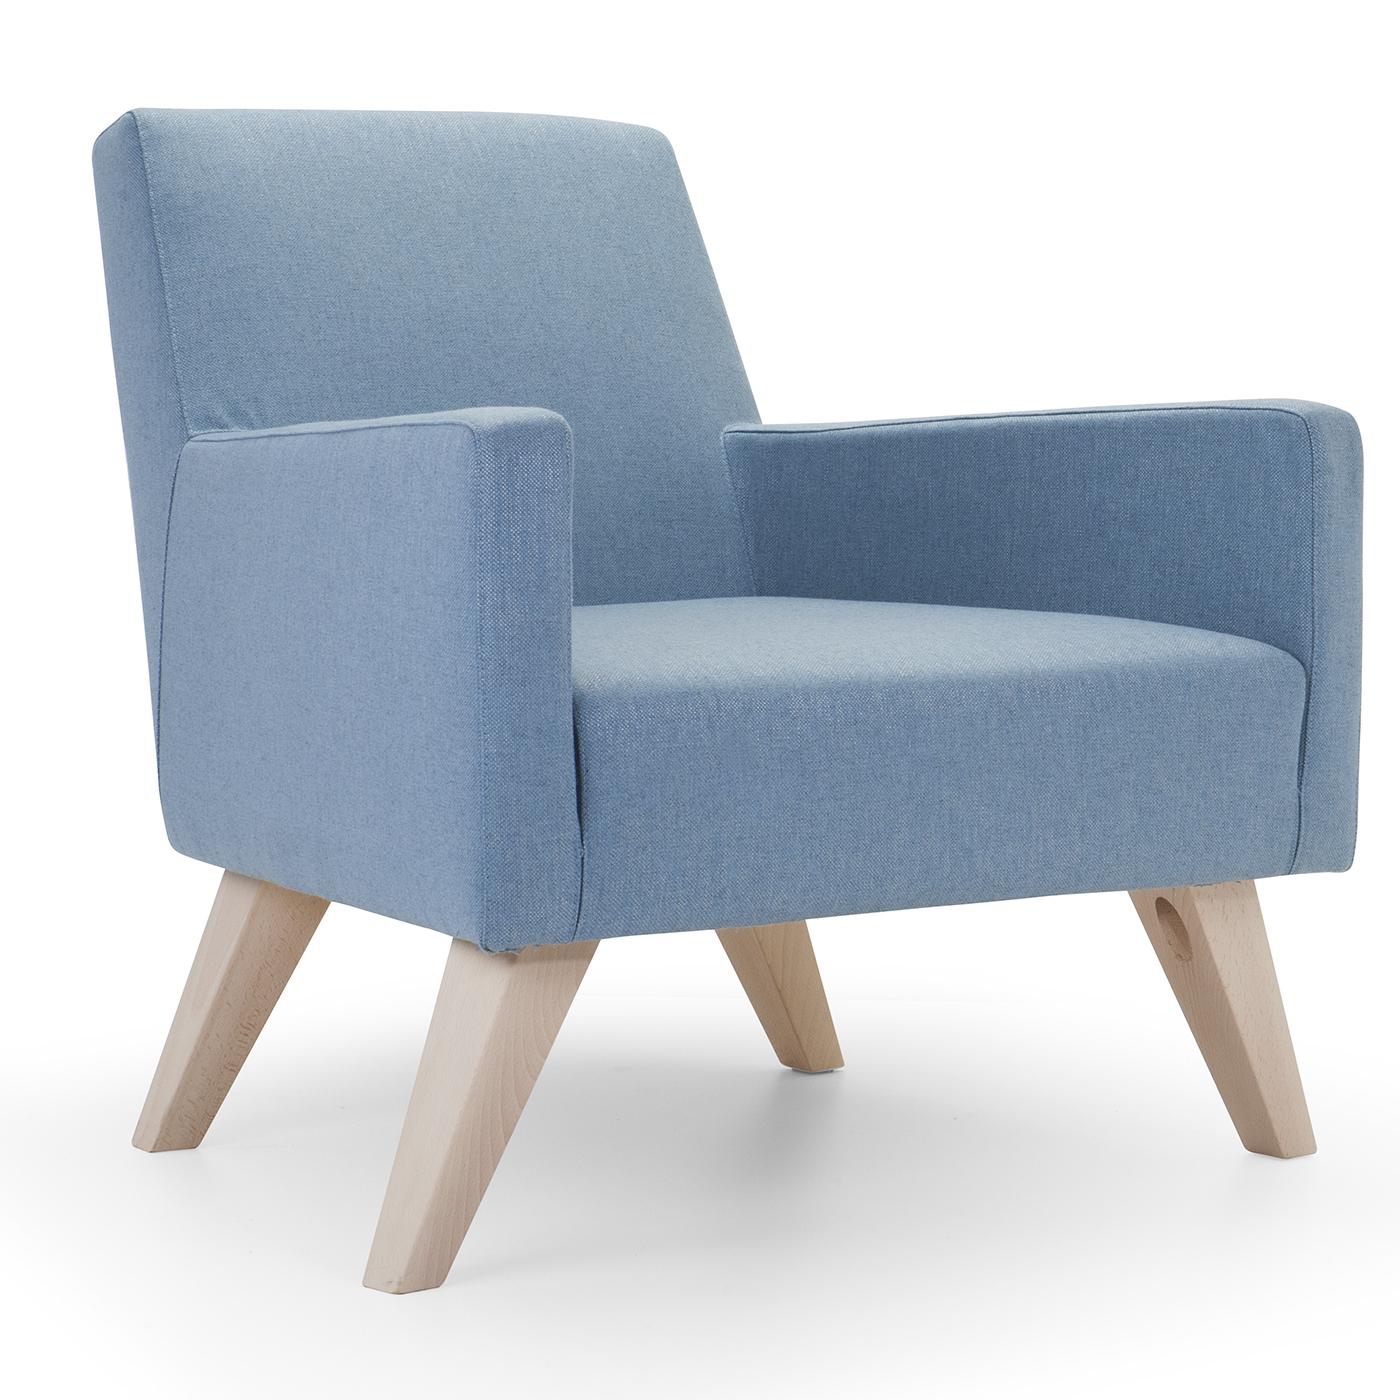 Softened by the light gray color of the Dacron upholstery, this armchair's edgy style makes an appealing addition to a modern living room or office. The frame is entirely padded with multi-density polyurethane and boasts closed armrests and a deep